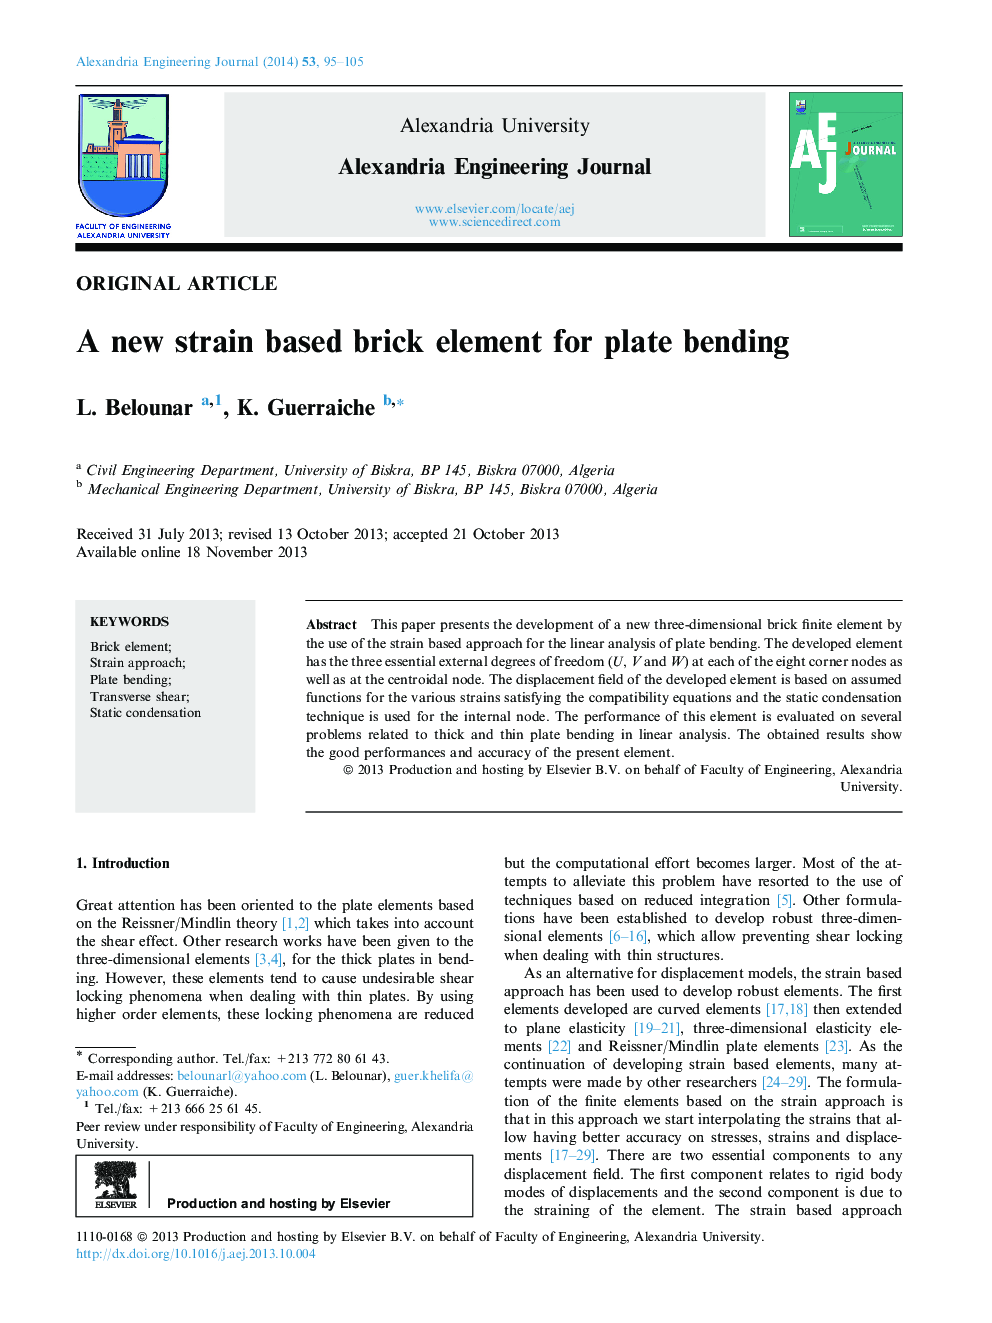 A new strain based brick element for plate bending